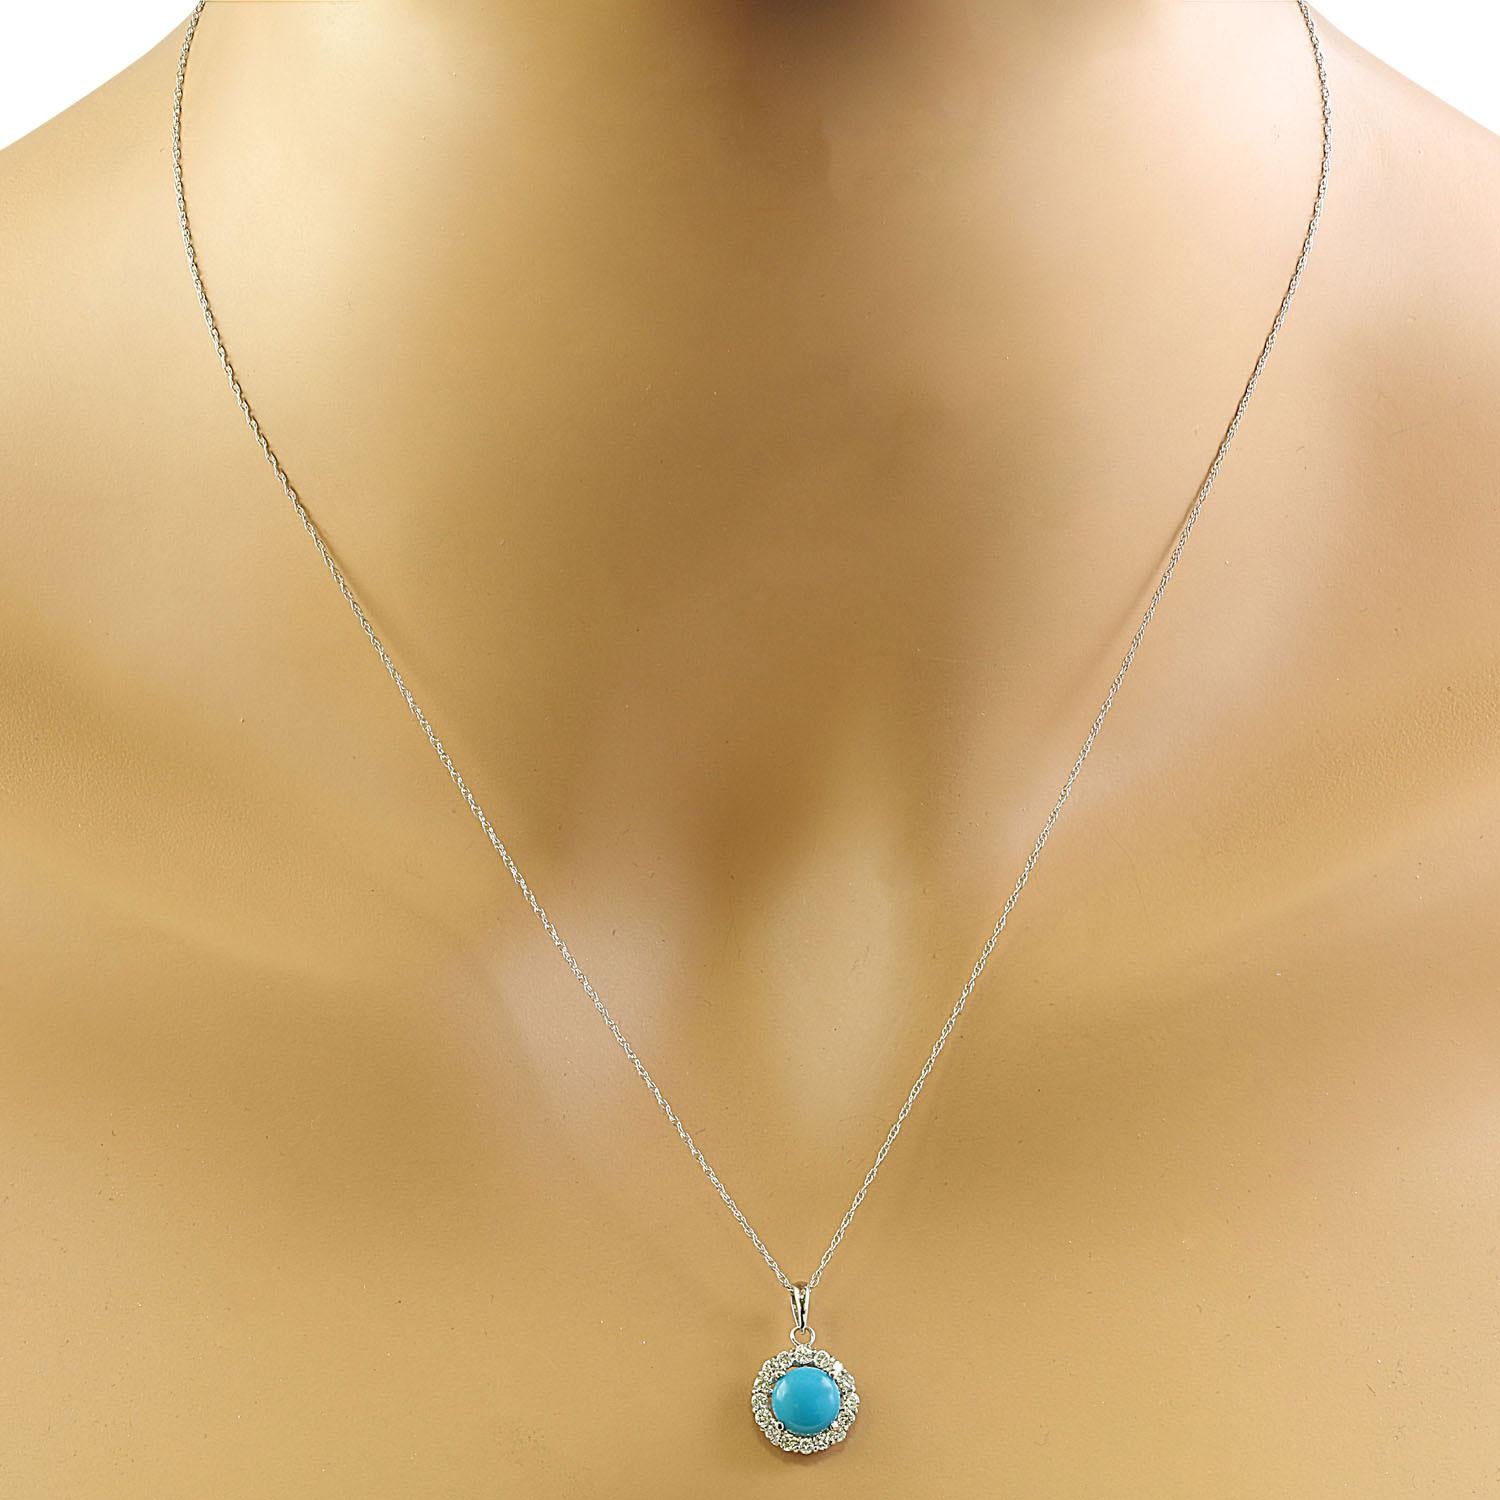 Exquisite Natural Turquoise Diamond Necklace In 14 Karat White Gold In New Condition For Sale In Los Angeles, CA